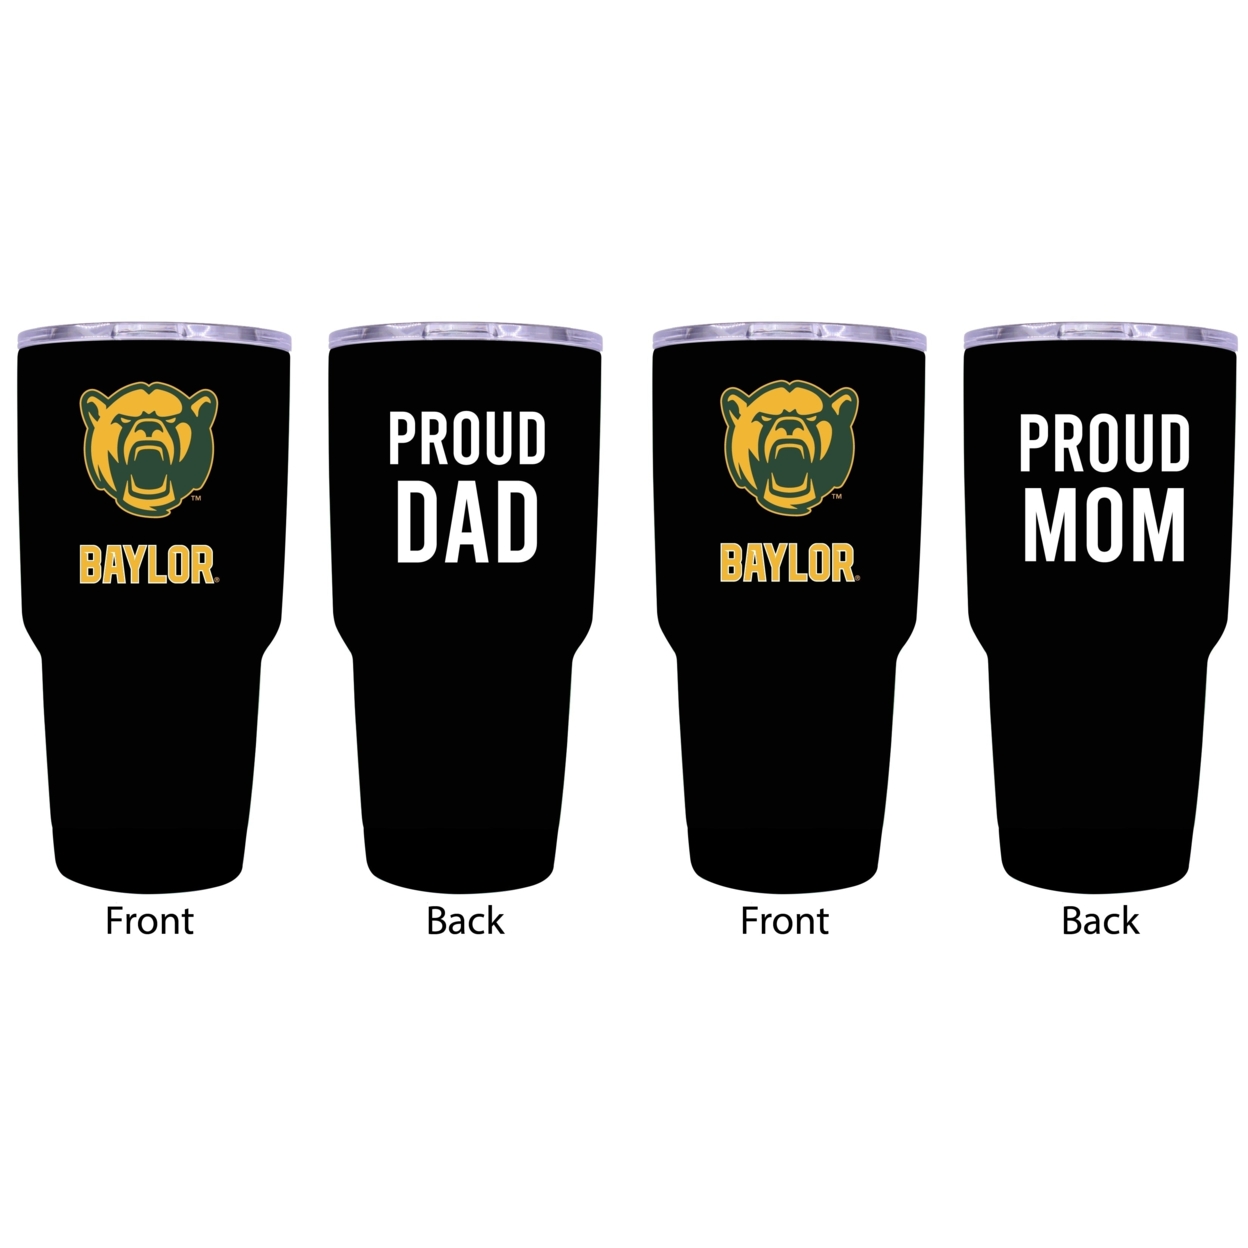 Baylor Bears Proud Mom And Dad 24 Oz Insulated Stainless Steel Tumblers 2 Pack Black.